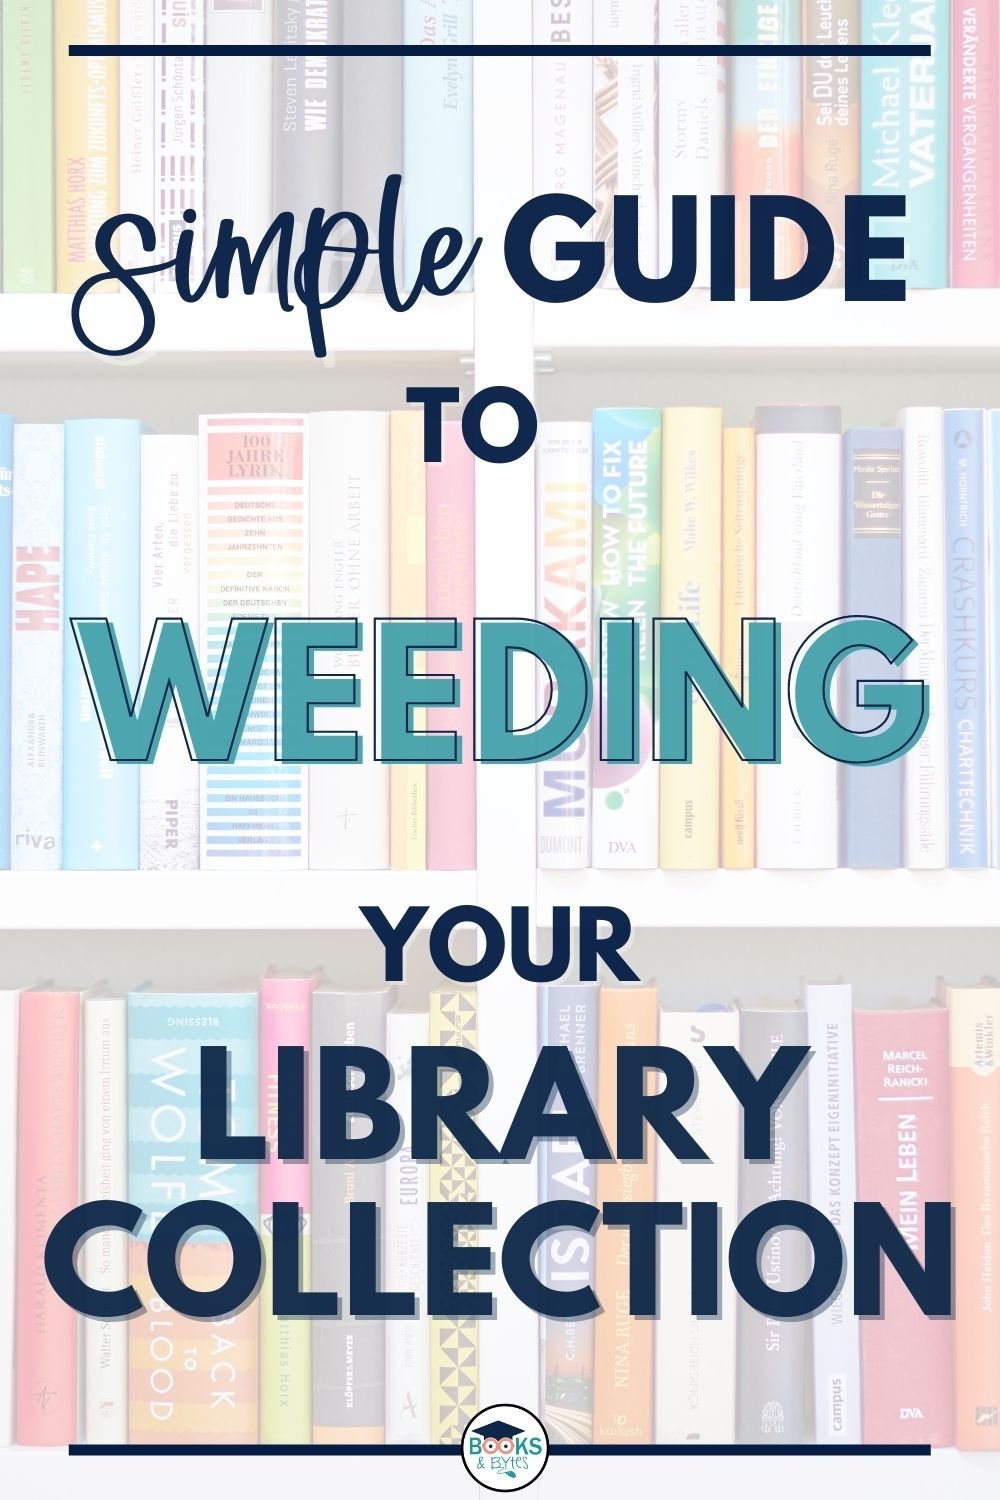 weeding your library collection.jpg